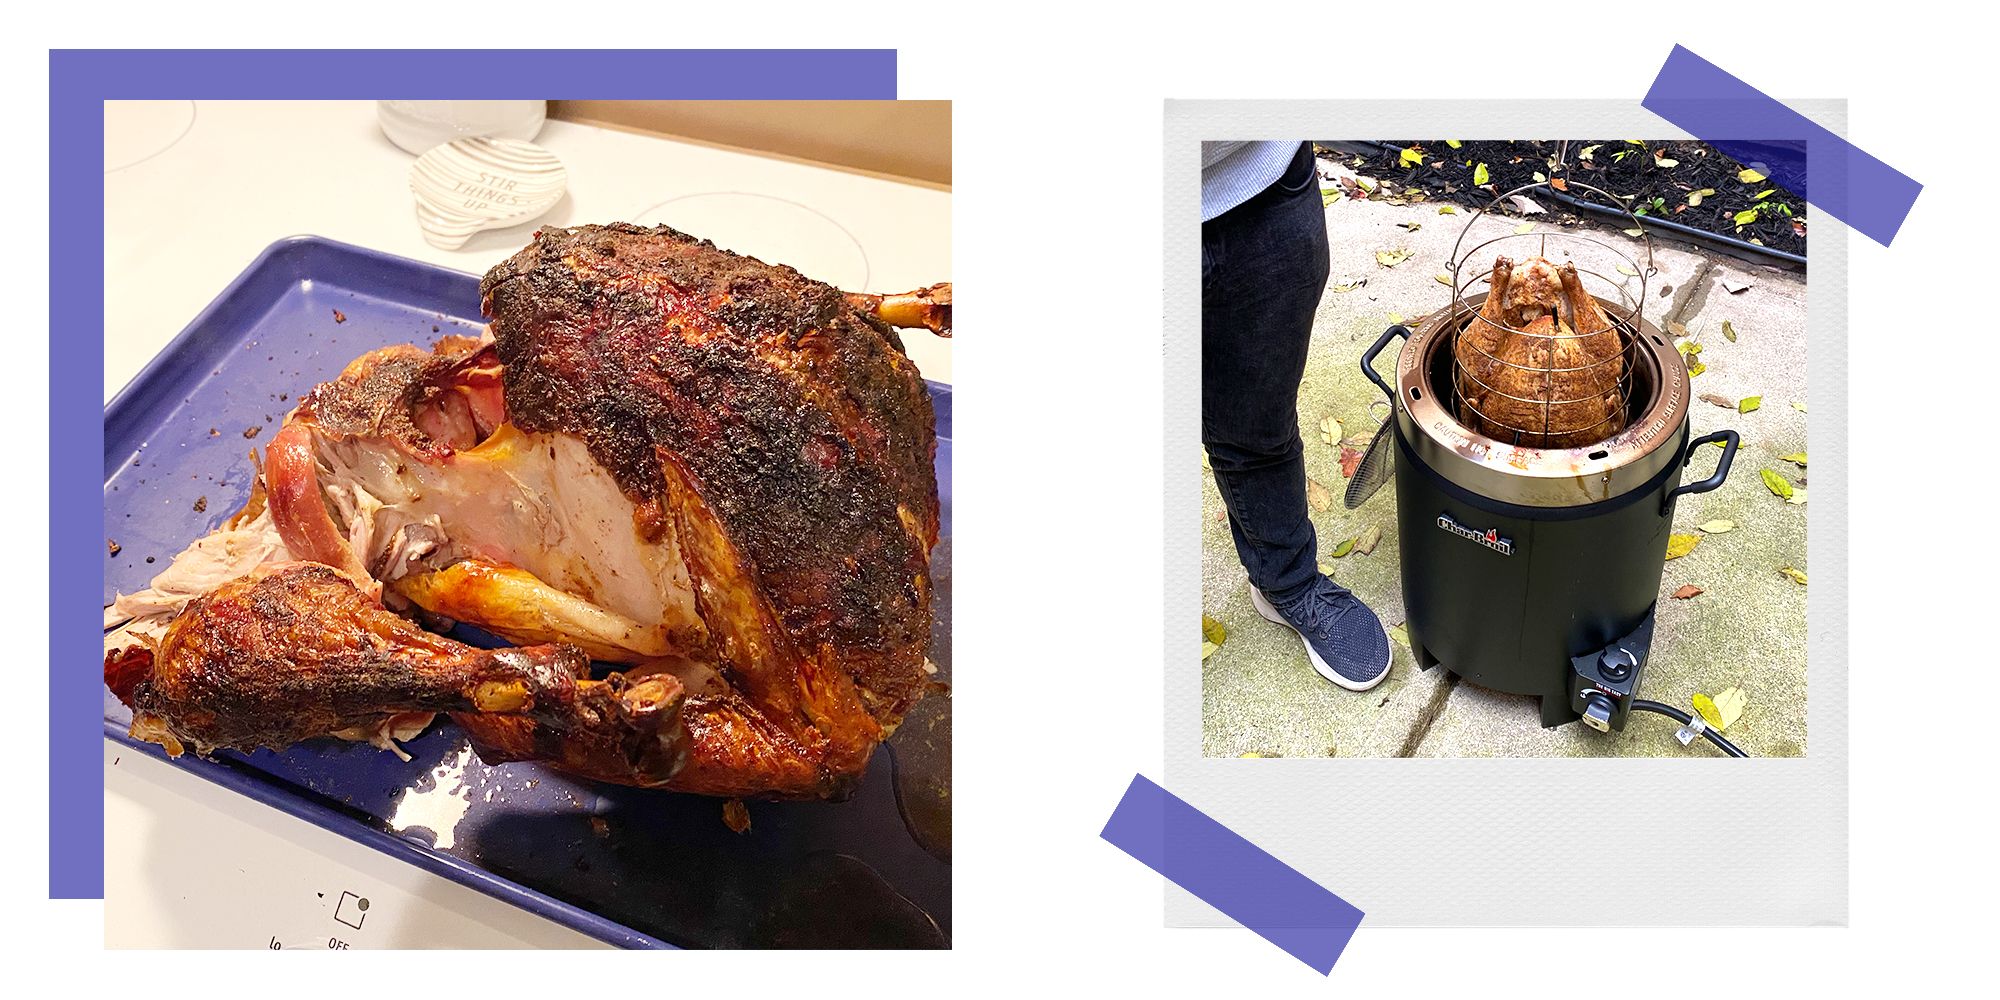 Char-Broil Big Easy Review: This Outdoor Turkey Fryer Is a Game-Changer